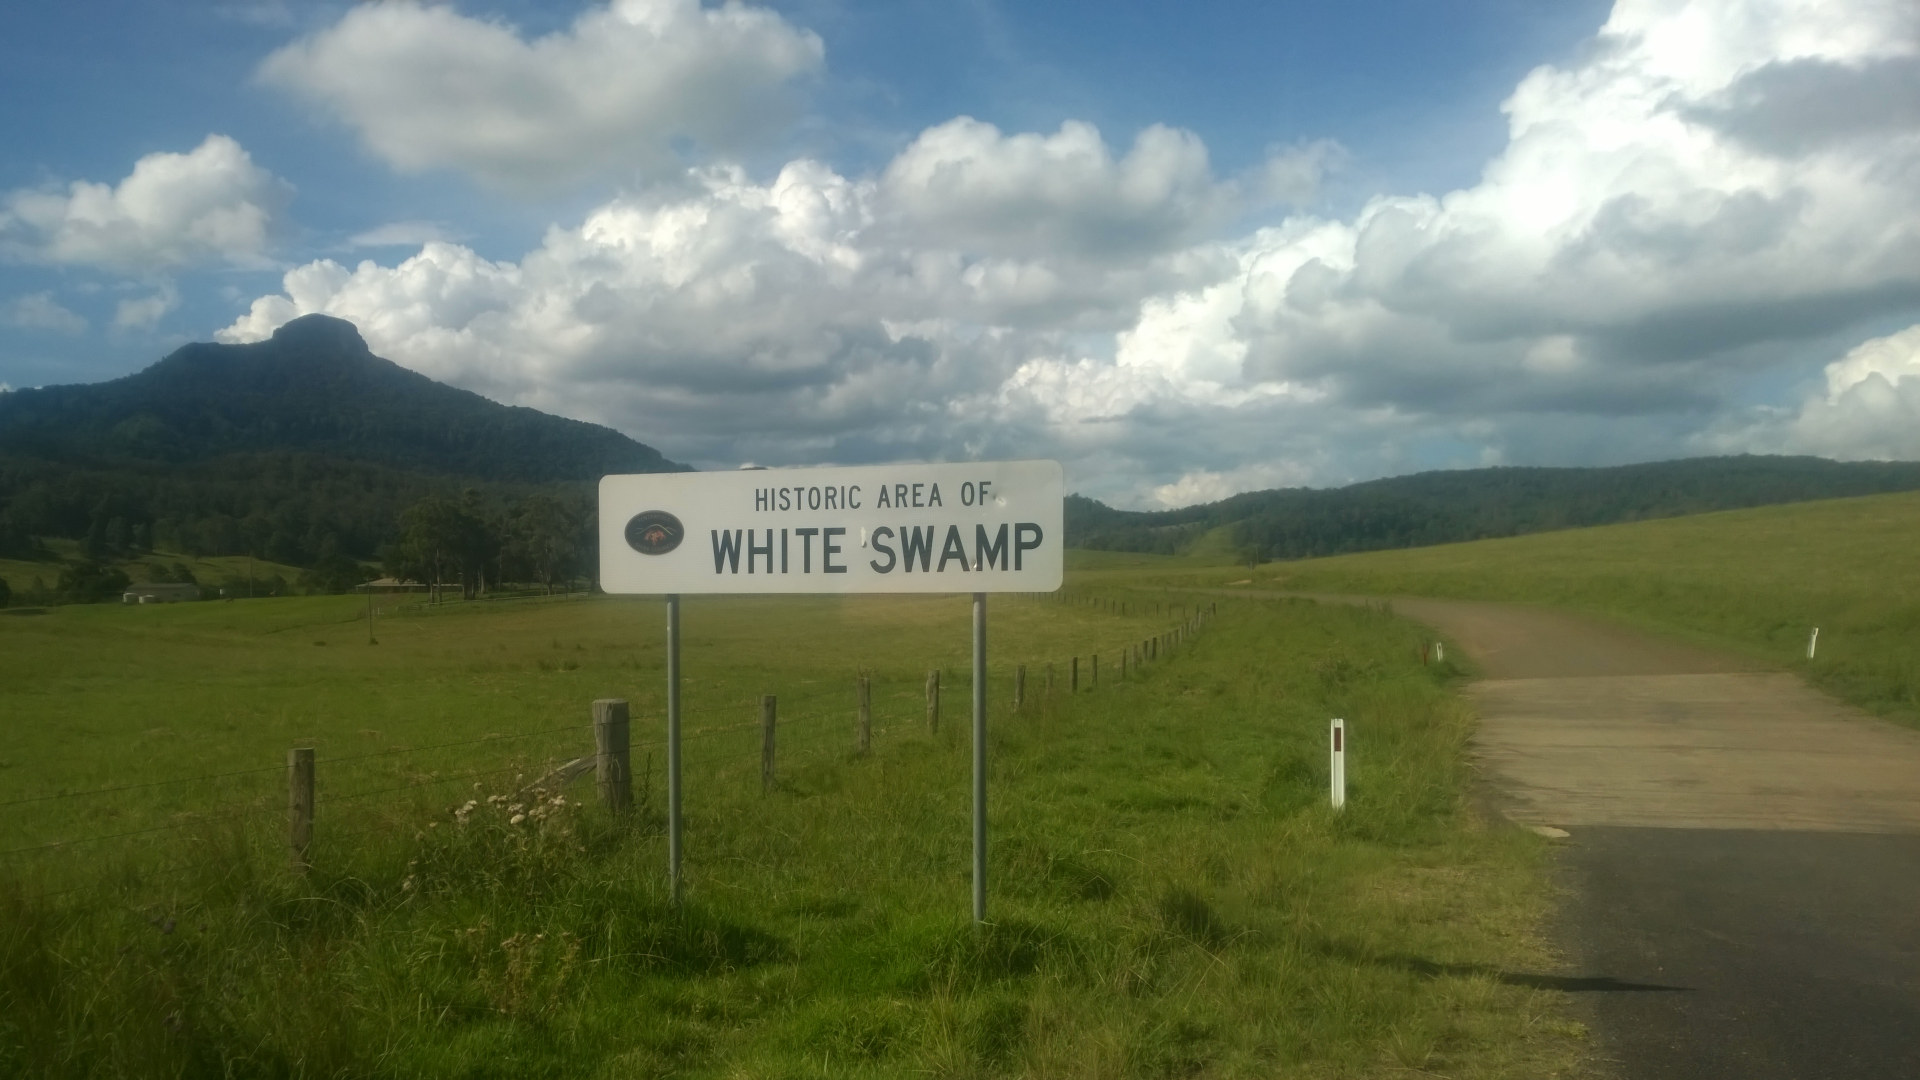 Sign for Historic Area of White Swamp, an area in New South Wales near the Queensland border. Once a village containing two general stores, a post office, school, cemetery, and a timber mill, but is now all but disappeared